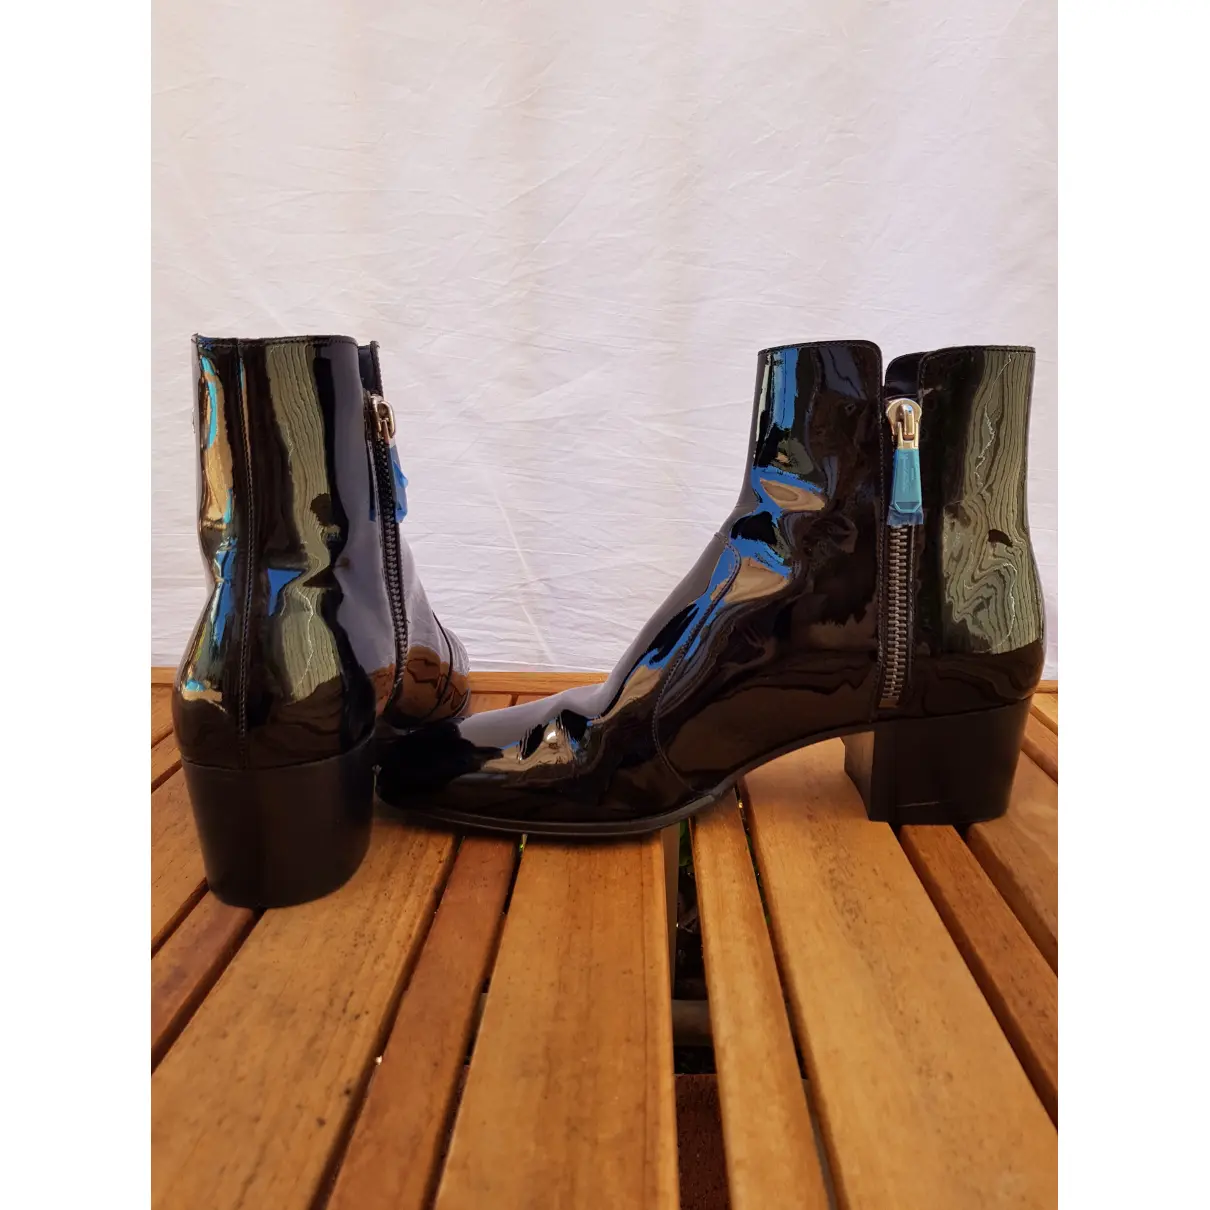 Buy Balmain Patent leather boots online